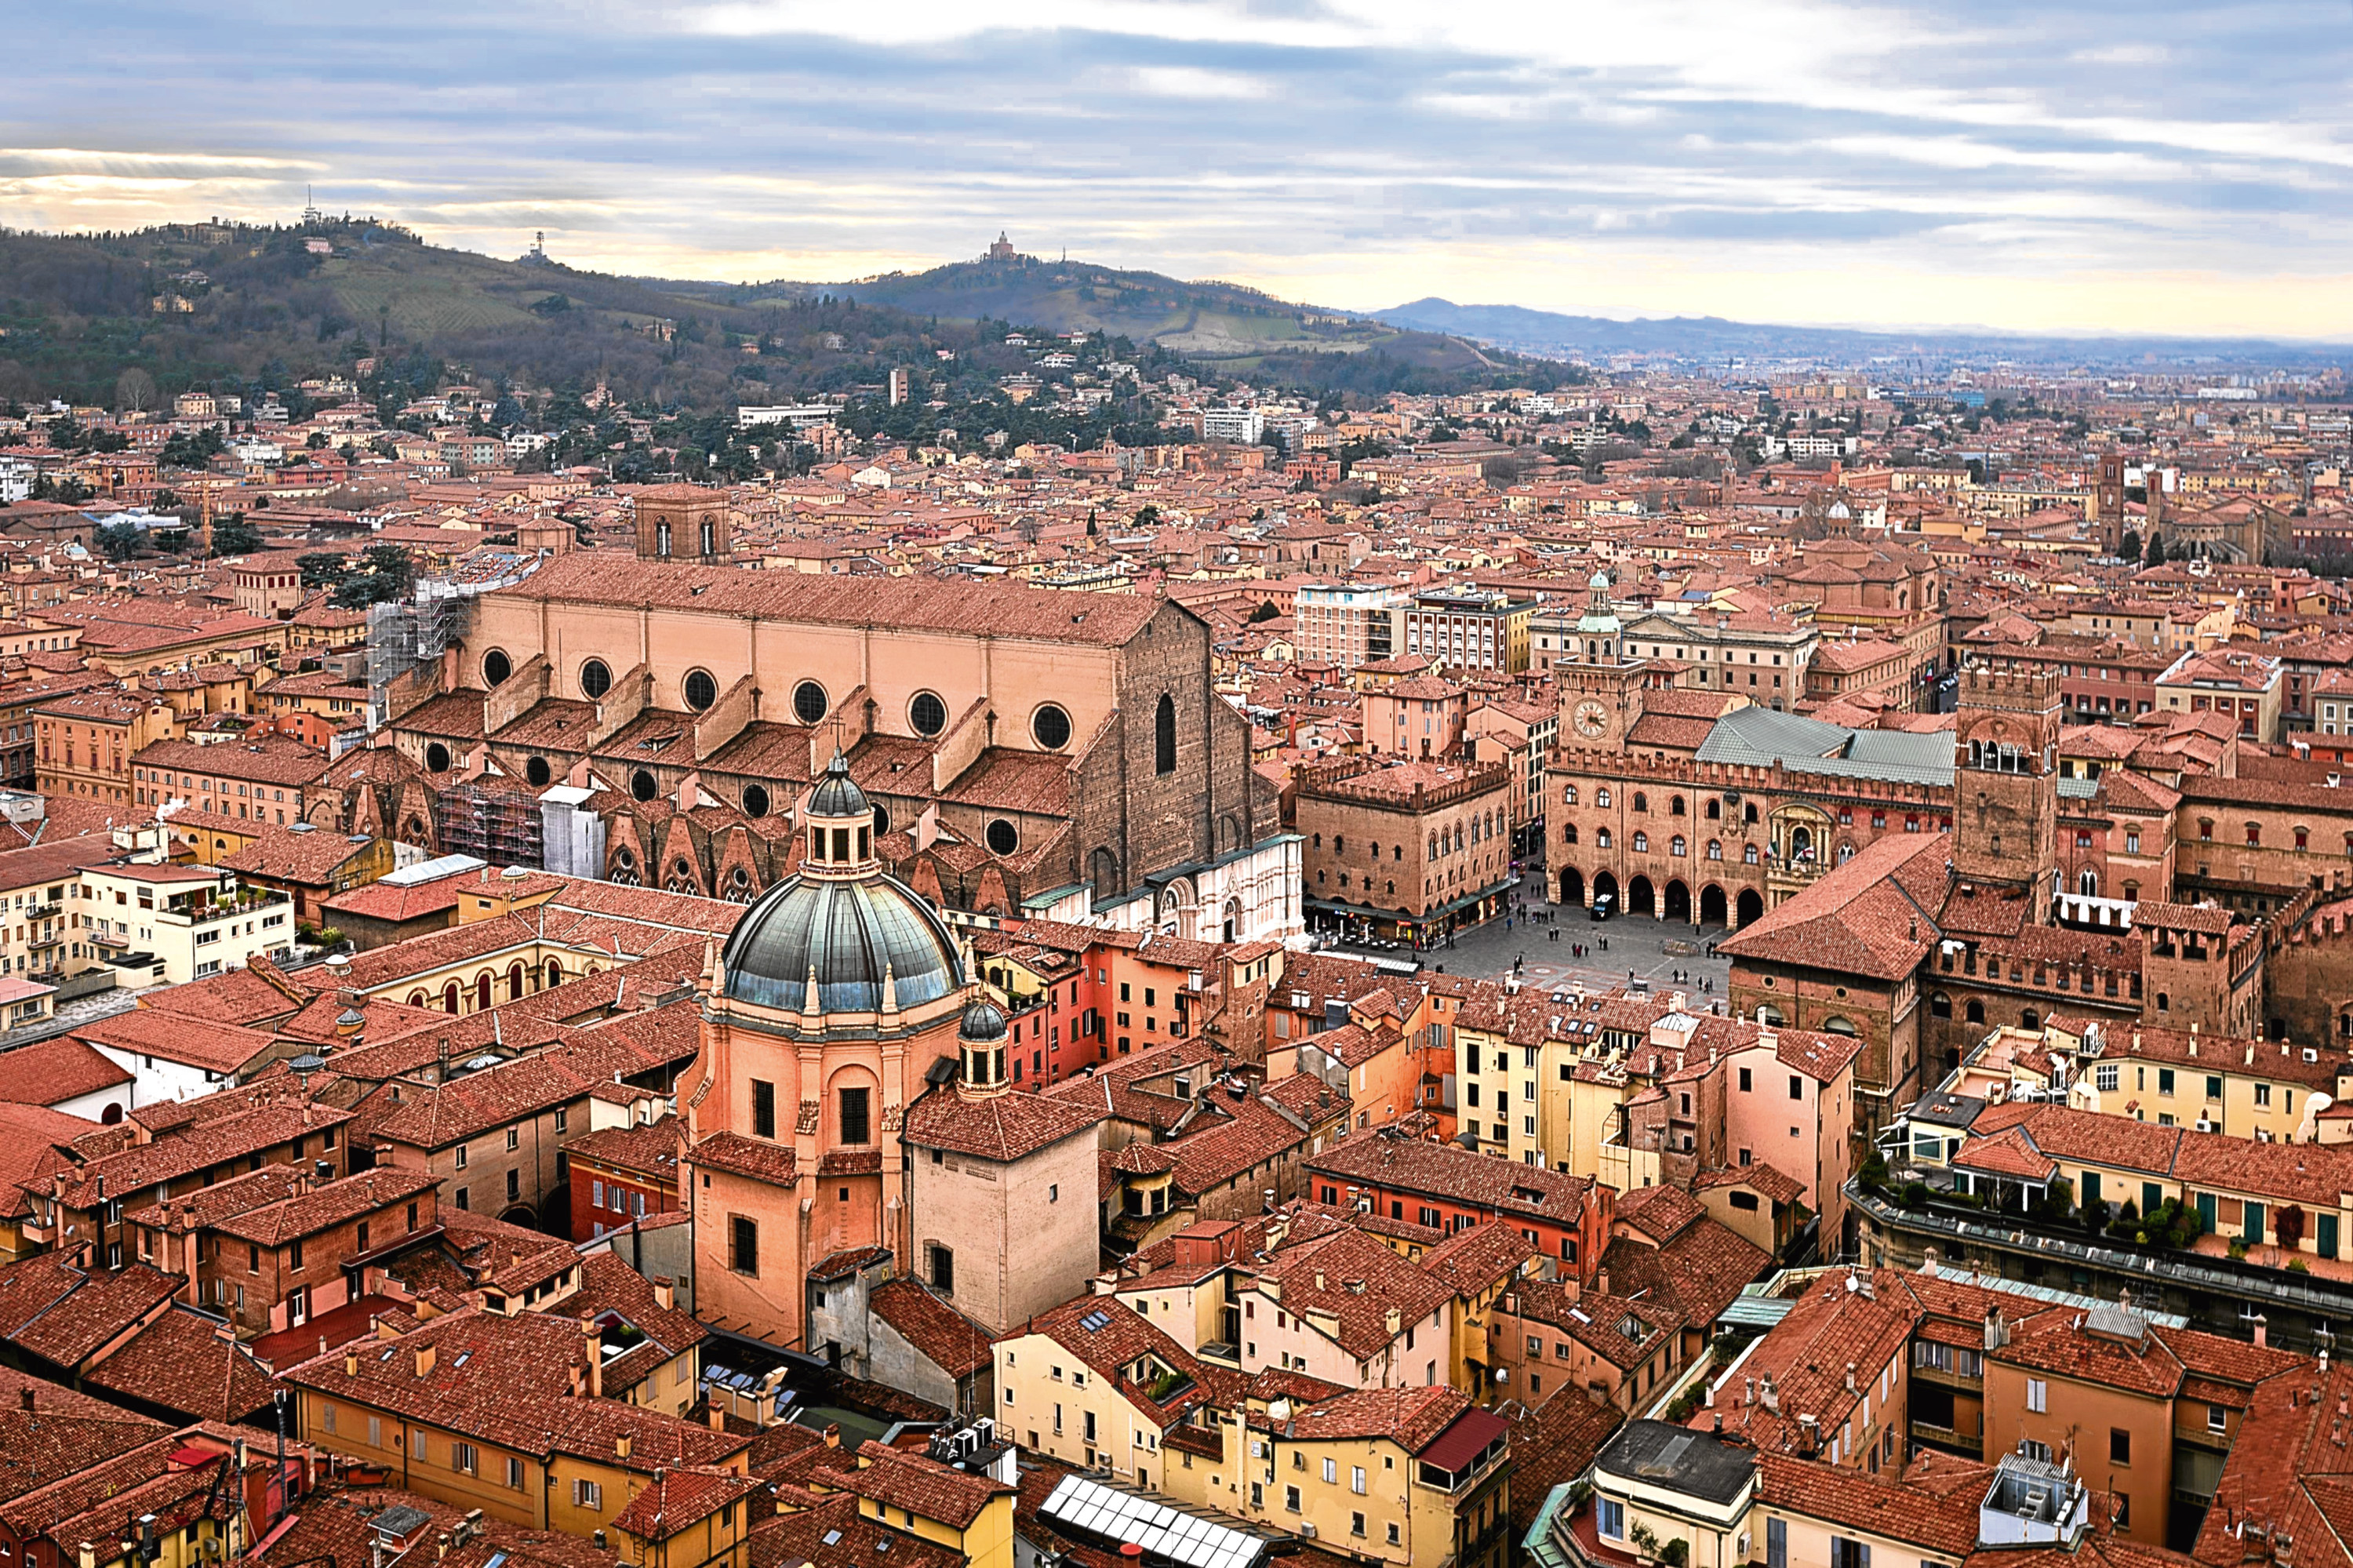 Aerial View of Bologna from Asinelli Tower